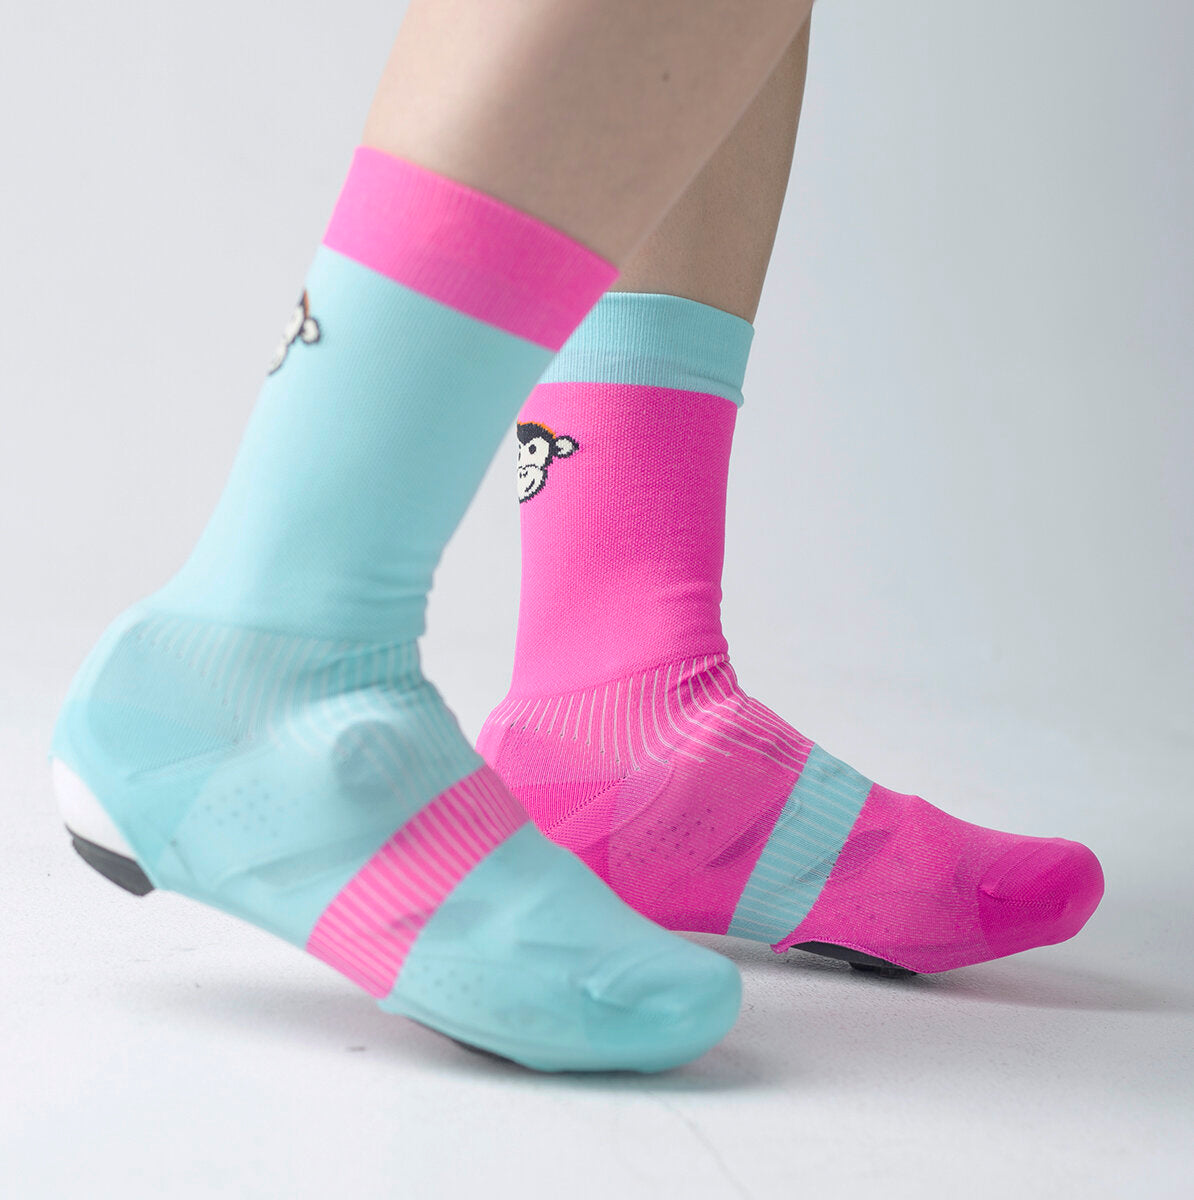 CYCLING BREAKER X1 OVERSOCK: PINK + TURQUOISE